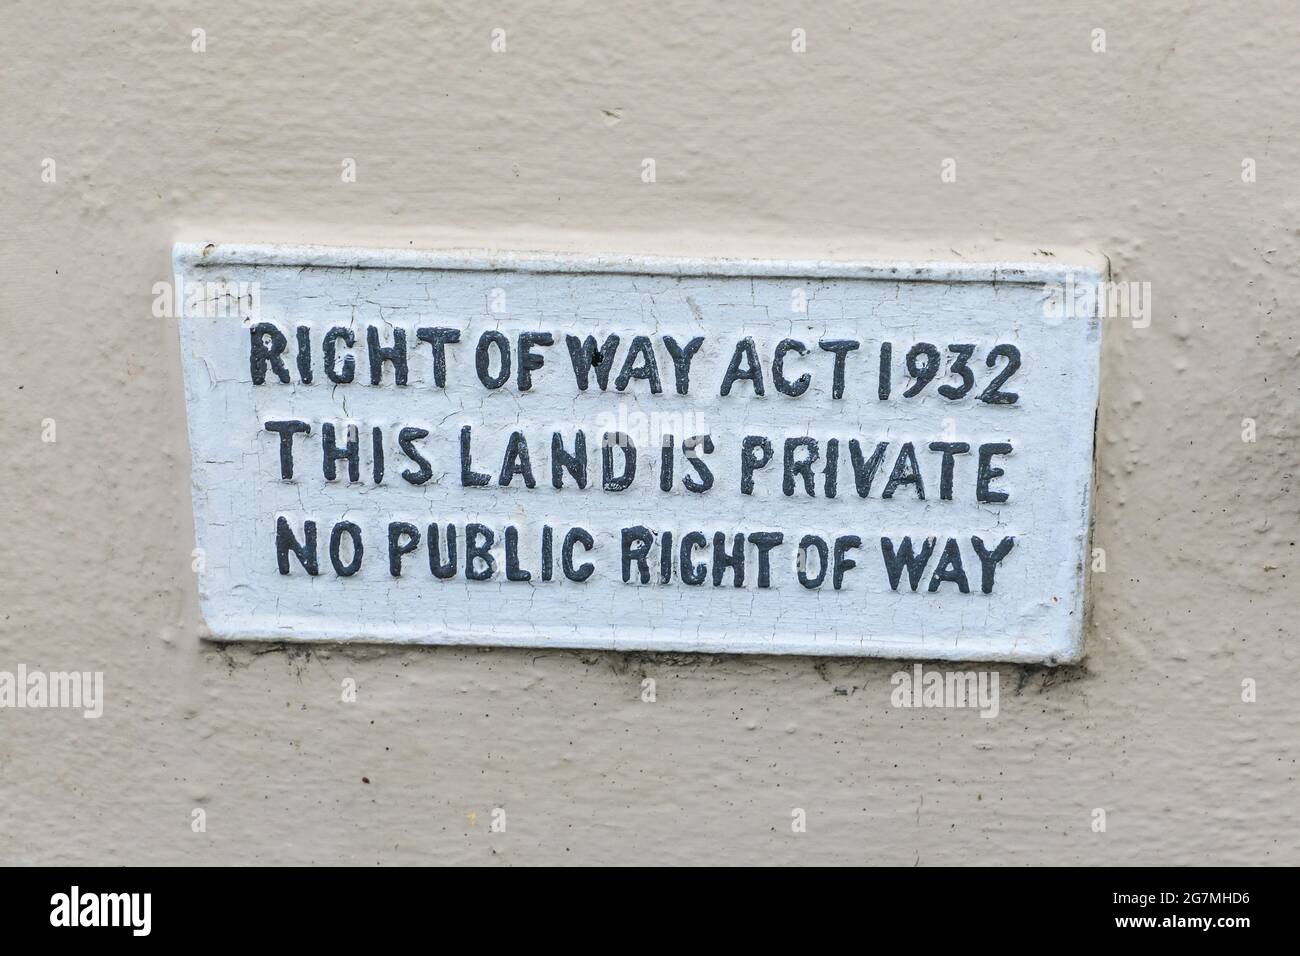 A sign on a wall saying 'Right of way Act 1932 This land is private no public right of way', England, UK Stock Photo